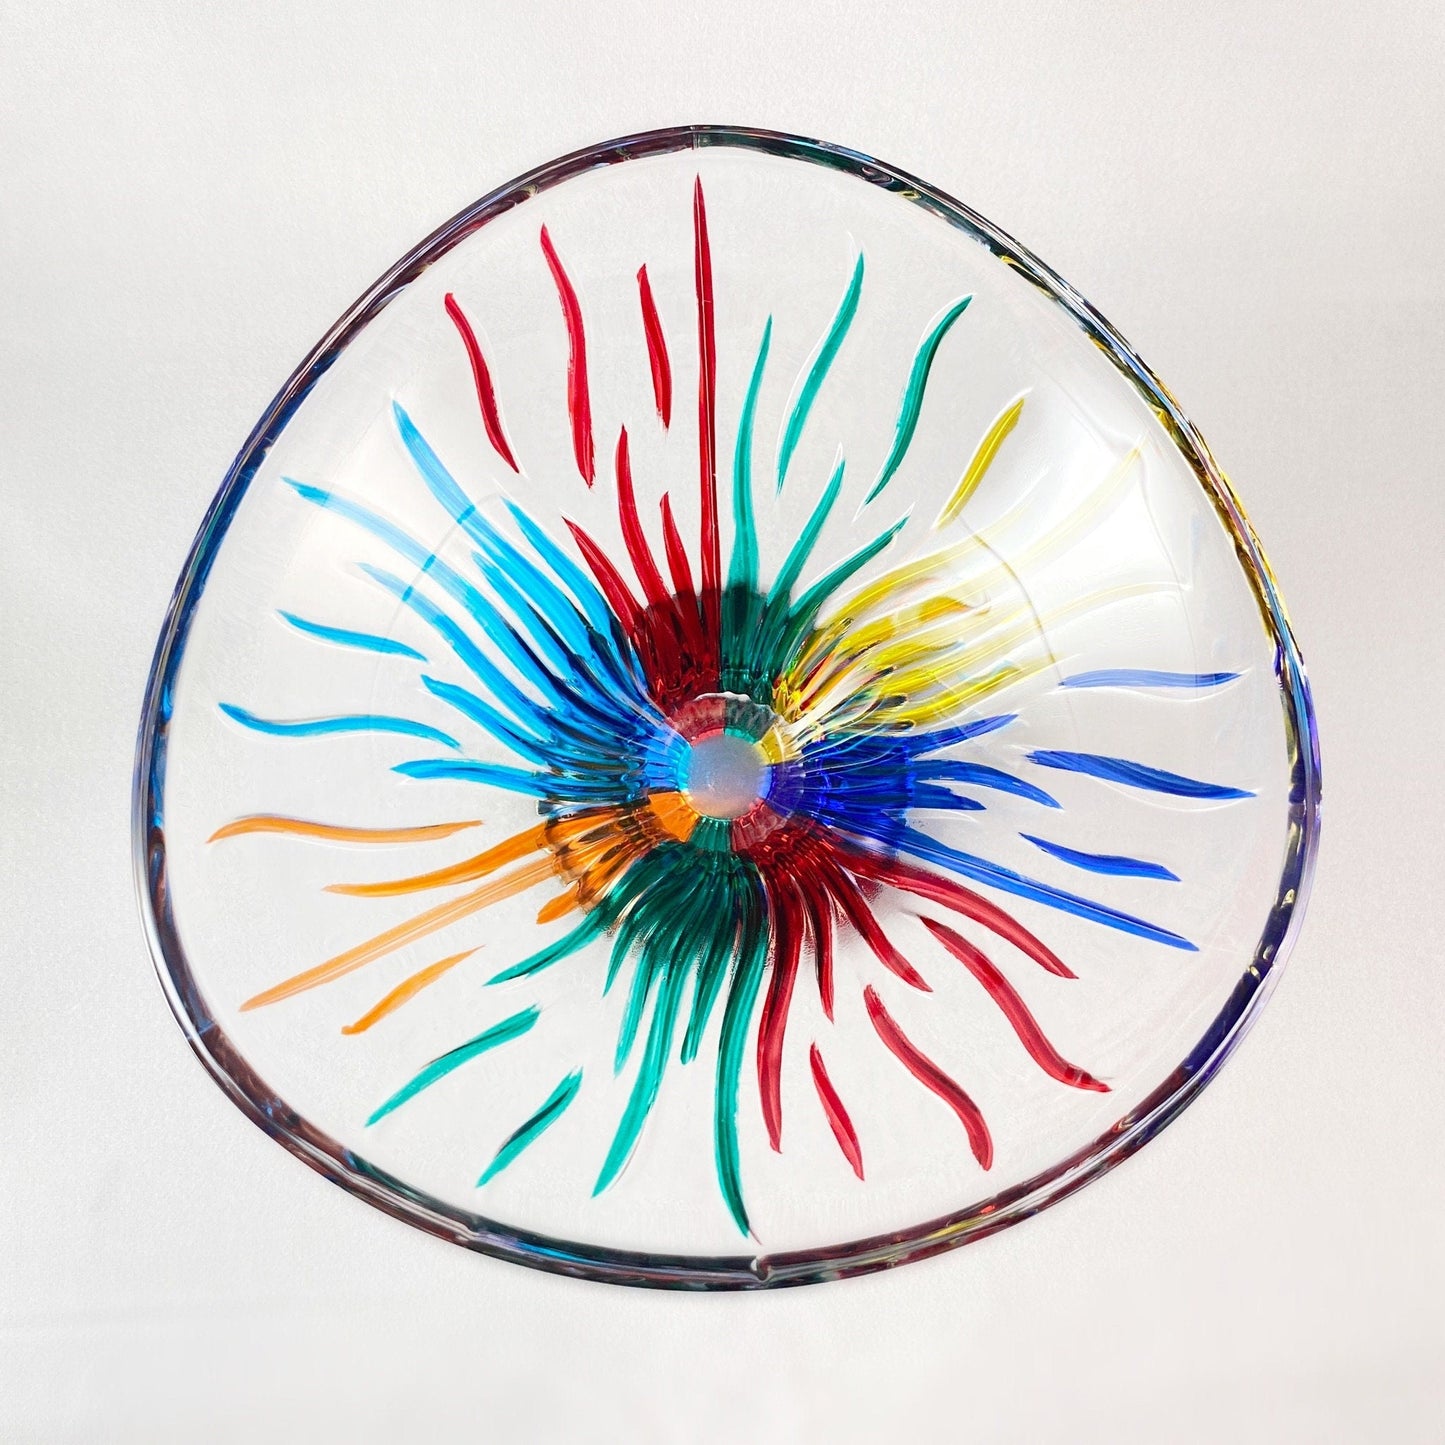 Venetian Glass Fire Dish on Pedestal - Handmade in Italy, Colorful Murano Glass Bowl